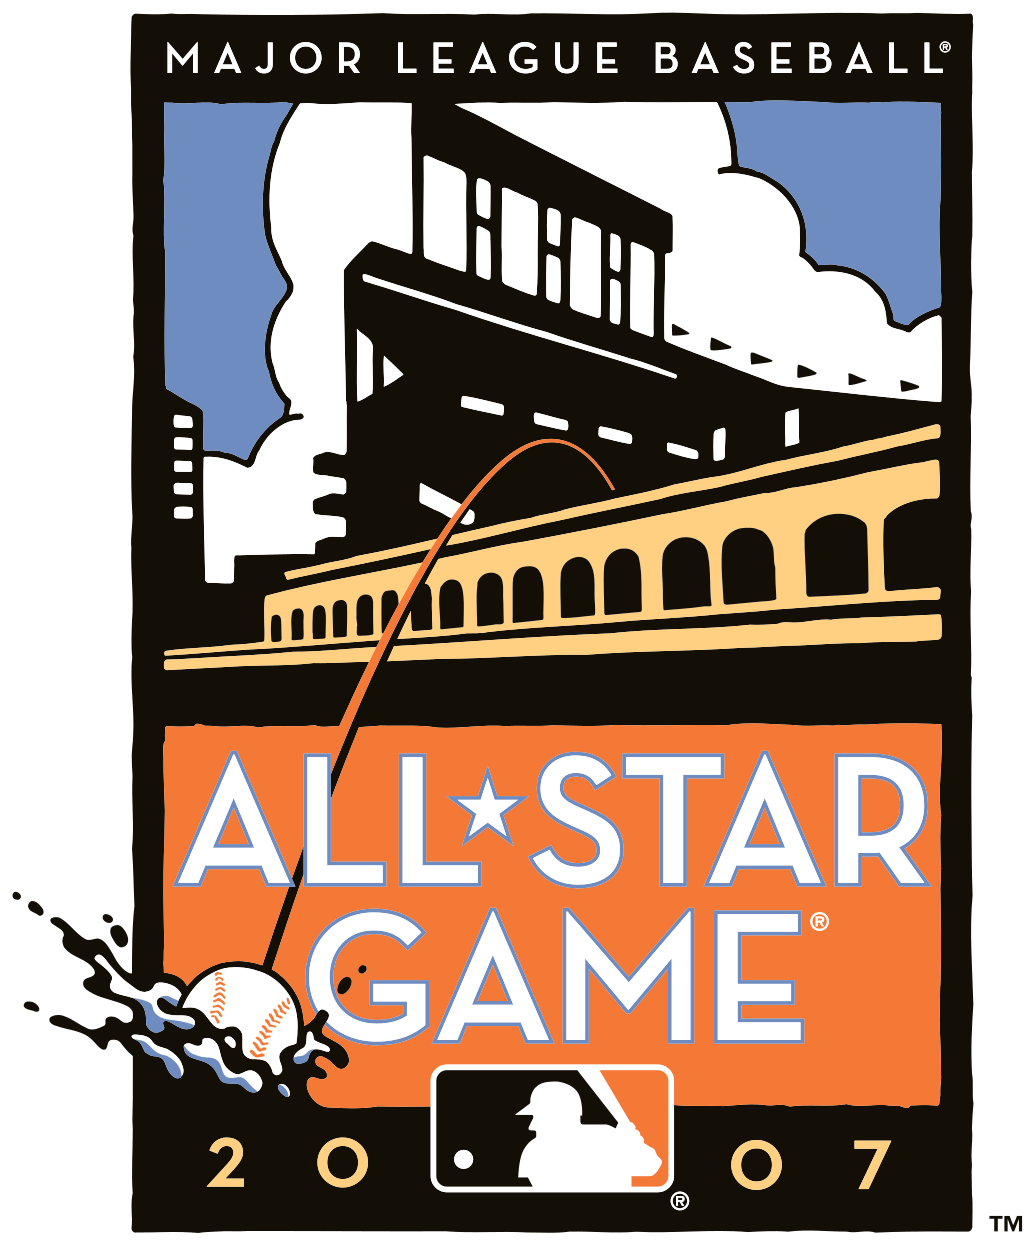 All-Star Futures Game all-time roster - Wikipedia